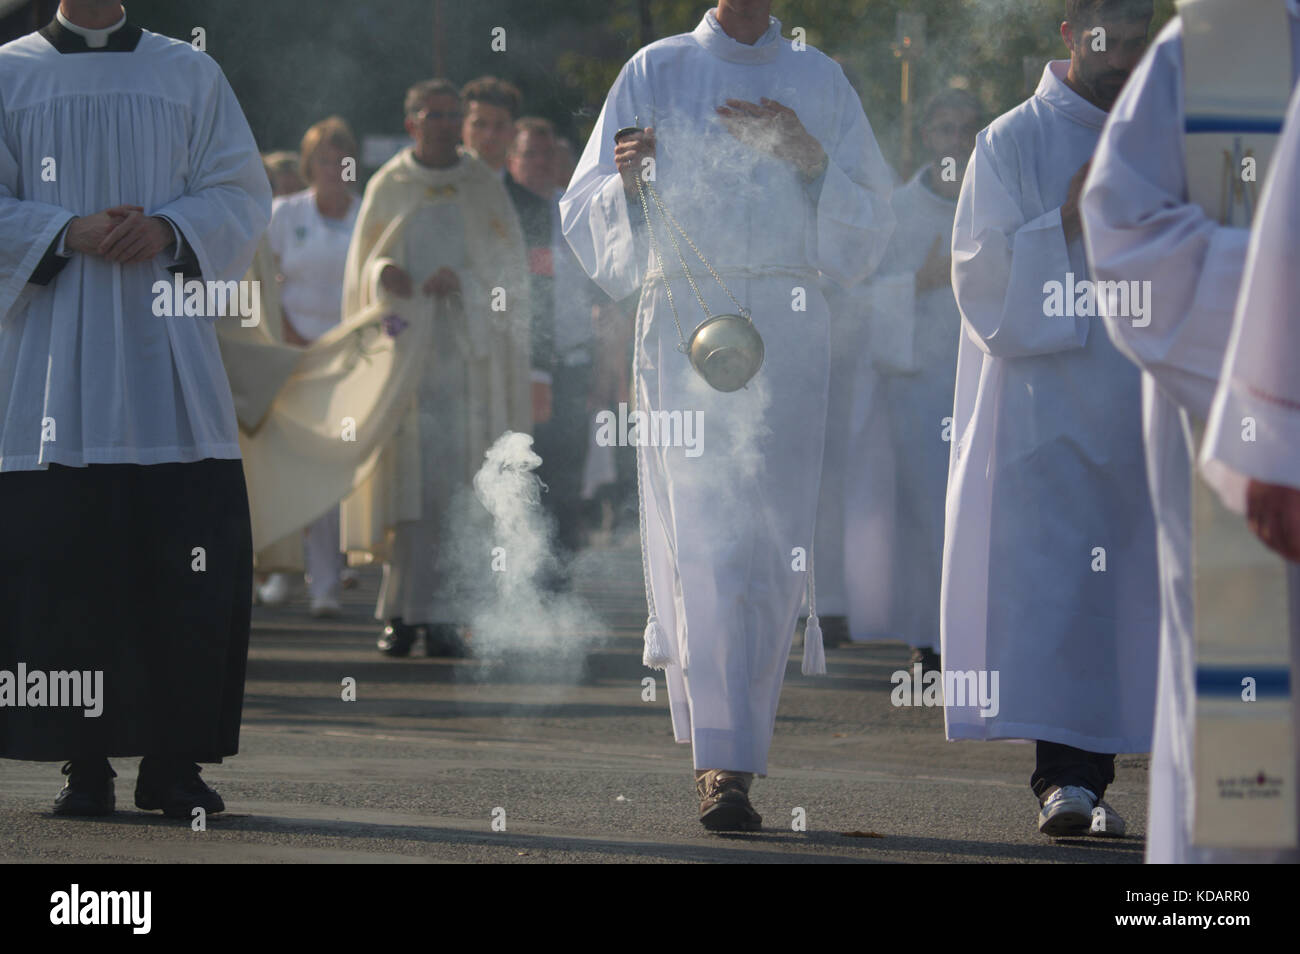 Procession of pilgrims and clergy at Lourdes, France Stock Photo